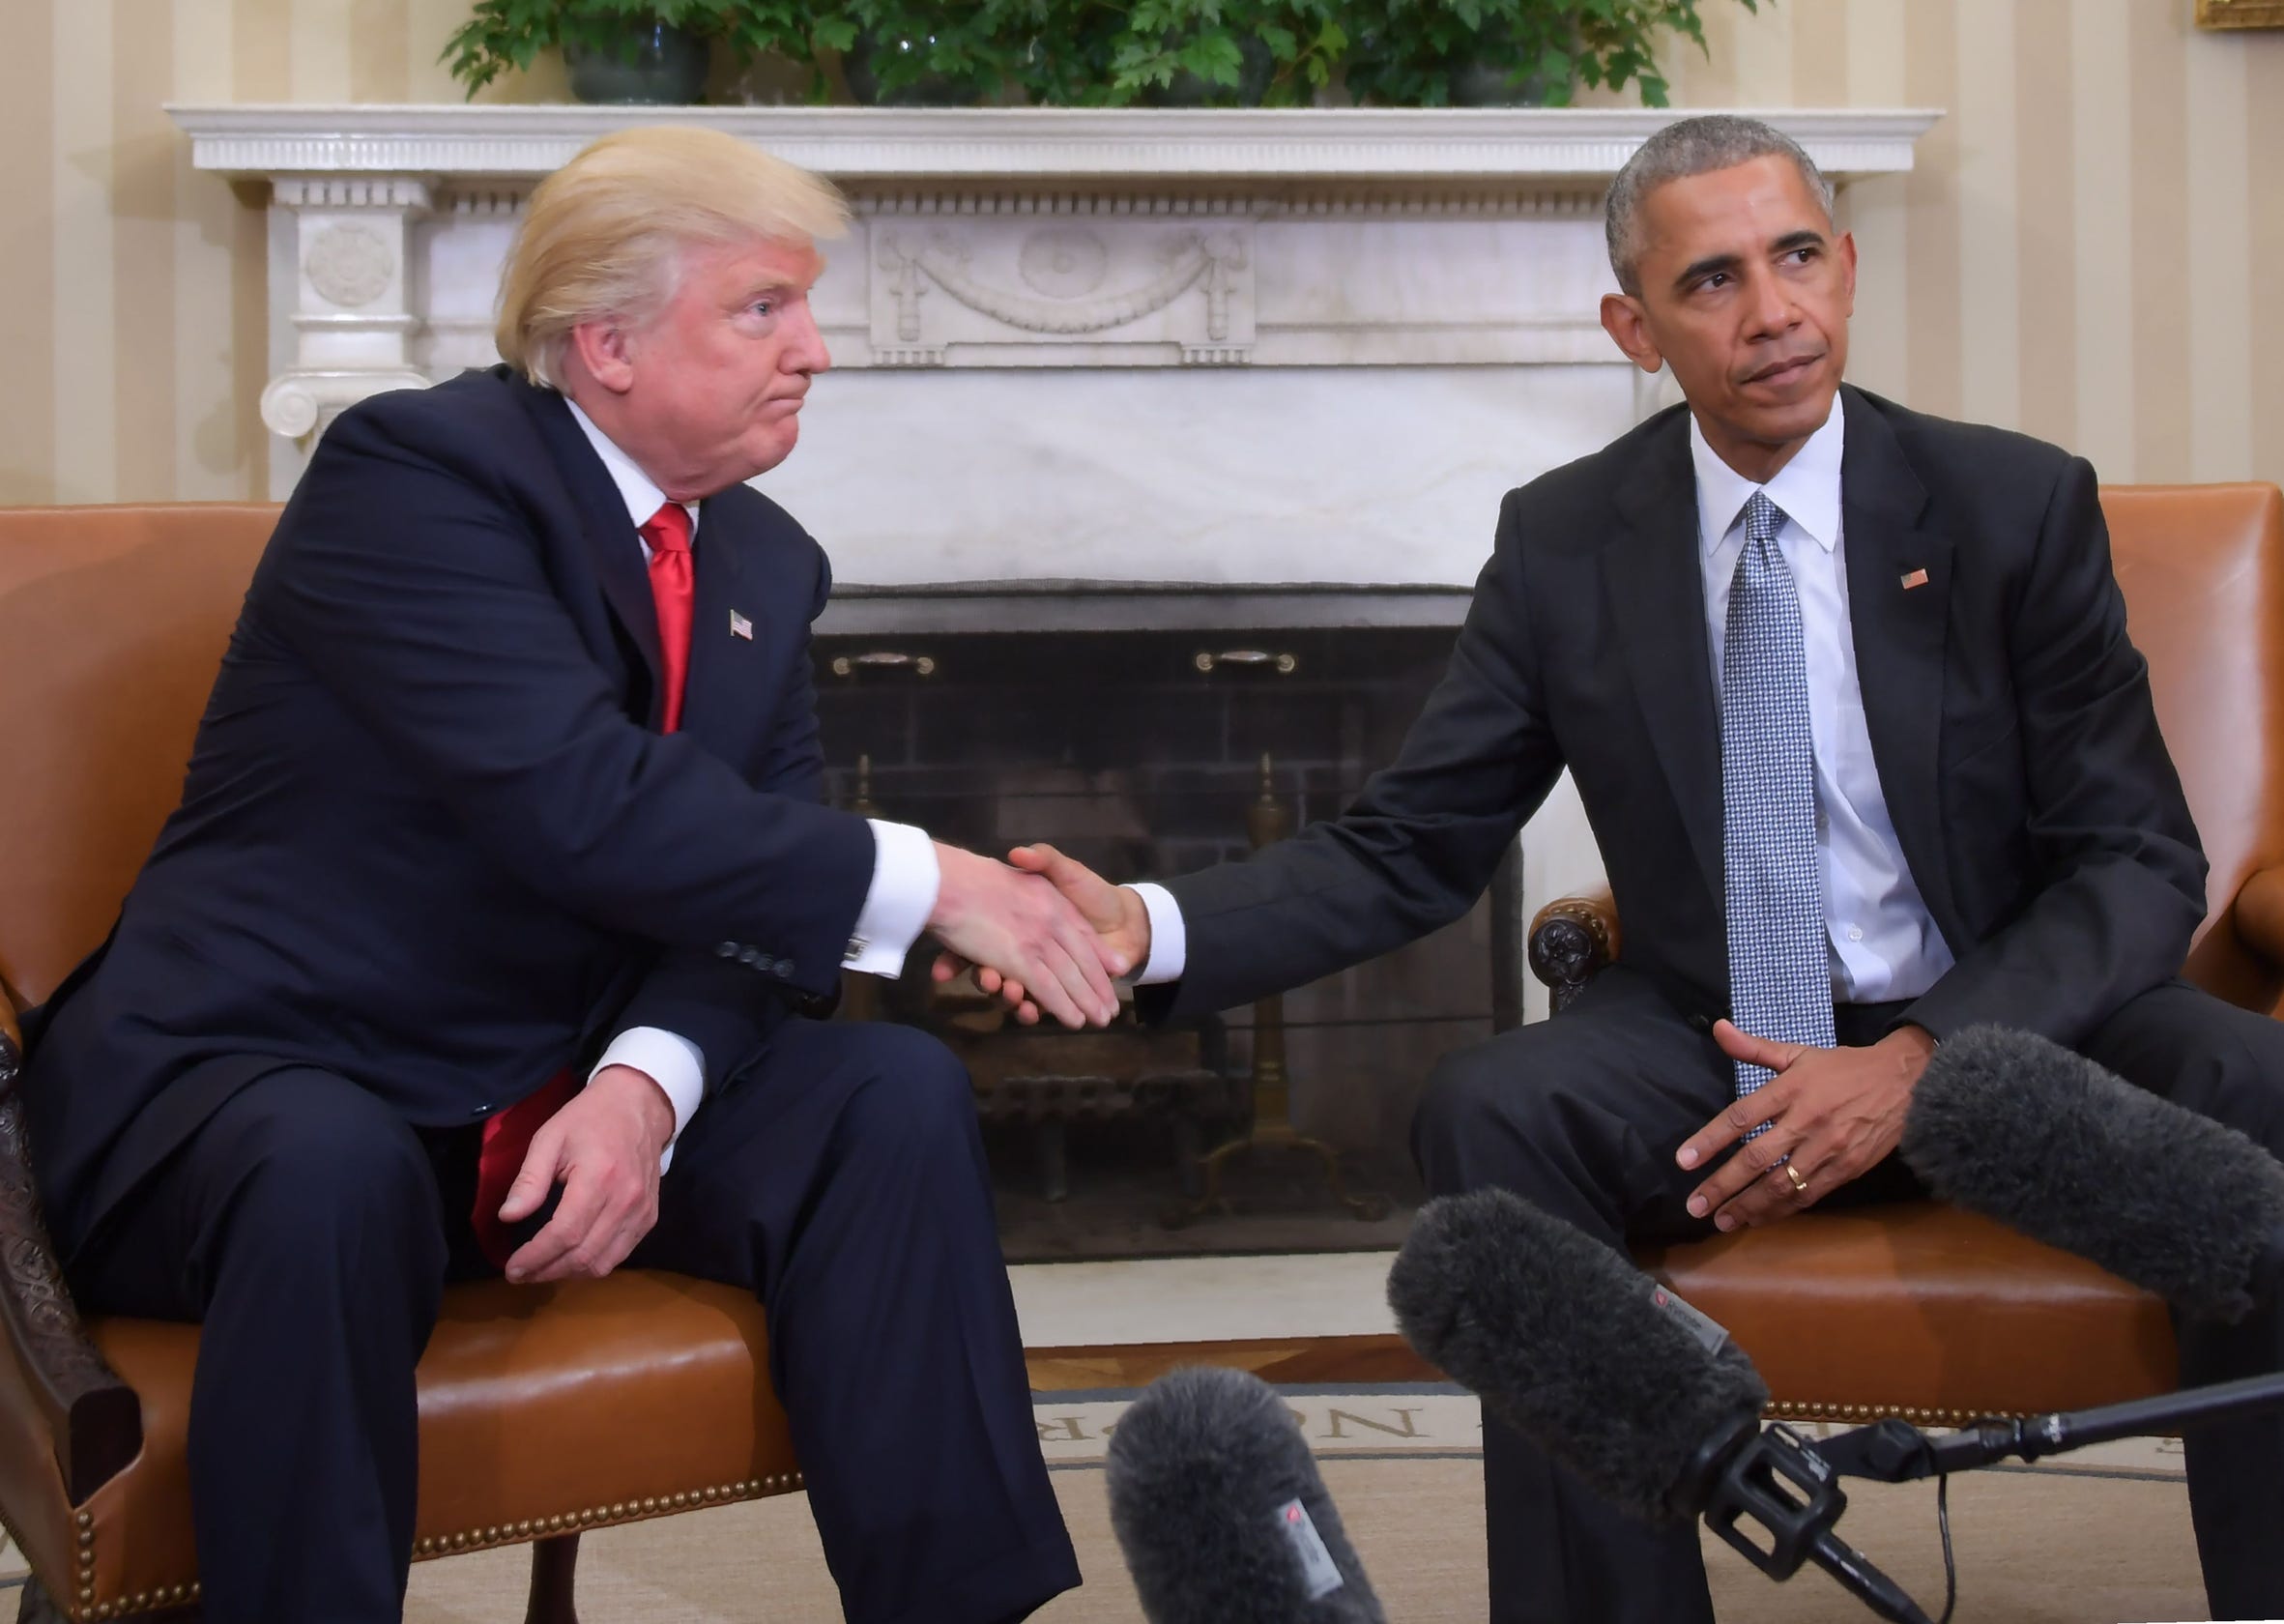 Barack Obama wishes 'speedy recovery' to President Trump, Melania 'no matter our party' thumbnail